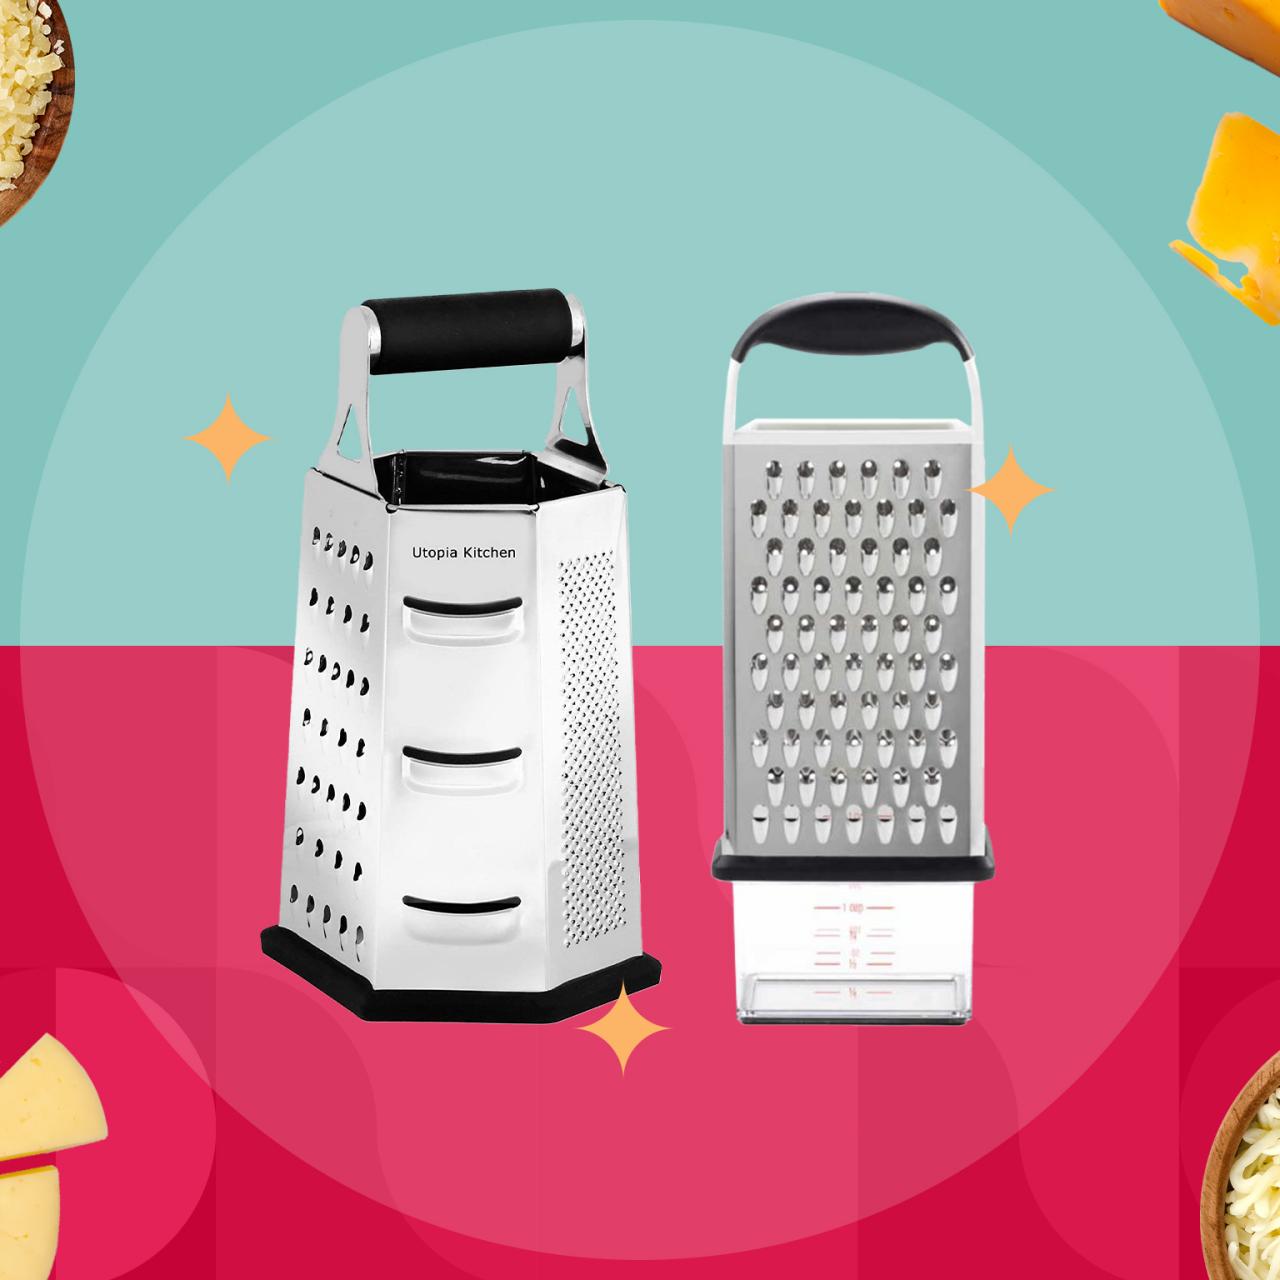 No Need to Say When: We Just Found the Exact Cheese Grater Used in